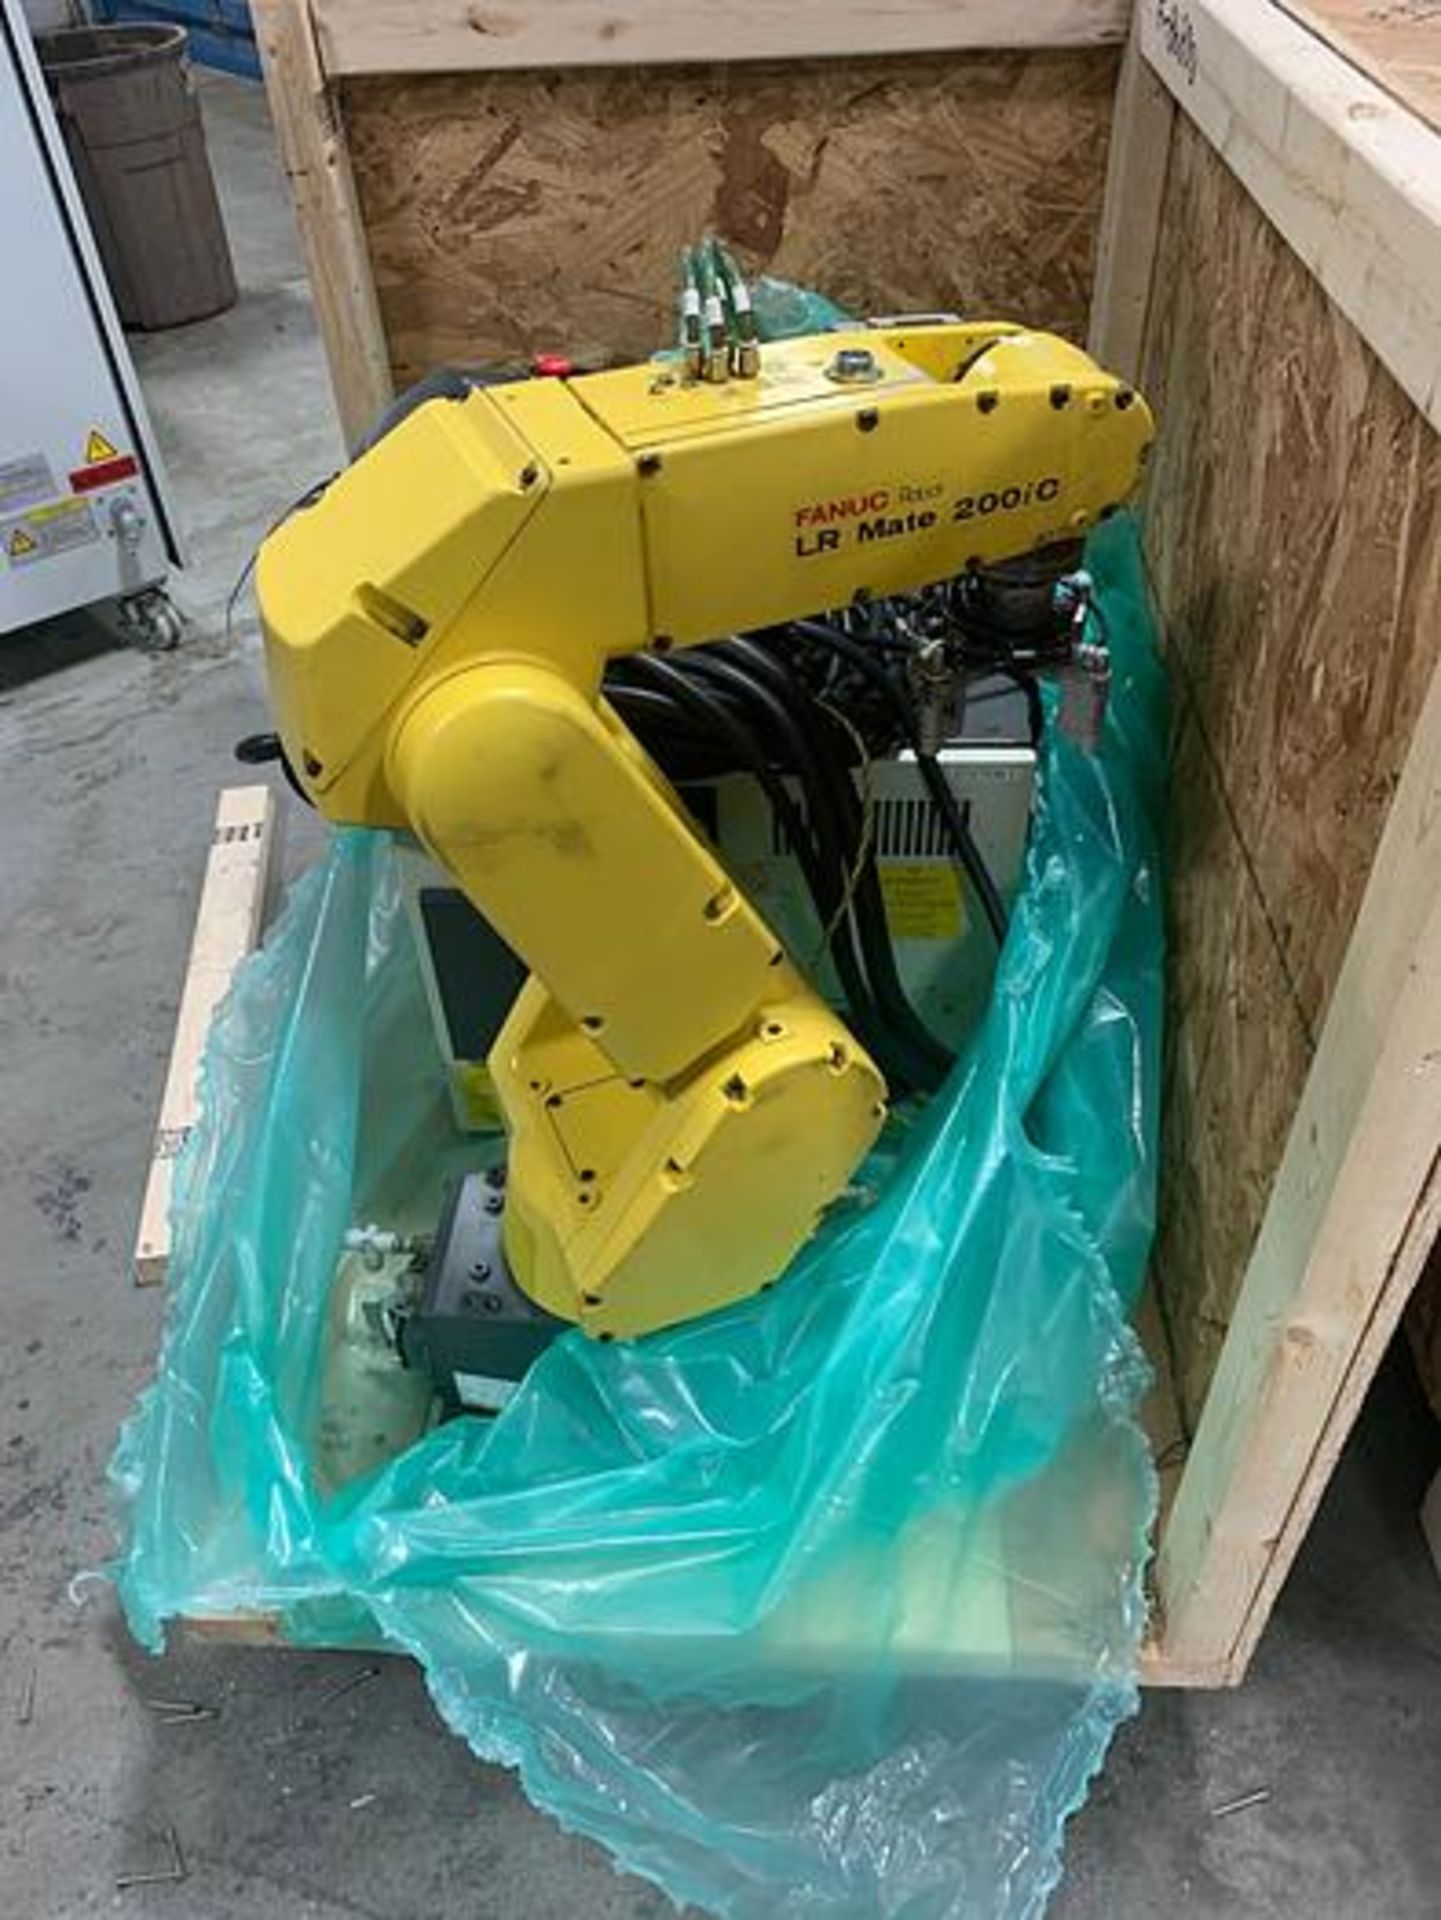 FANUC LR MATE 200iC 6 AXIS CNC ROBOT WITH R30iA MATE CONTROLLER, SN F86890, YEAR 2007 LOCATION MI,